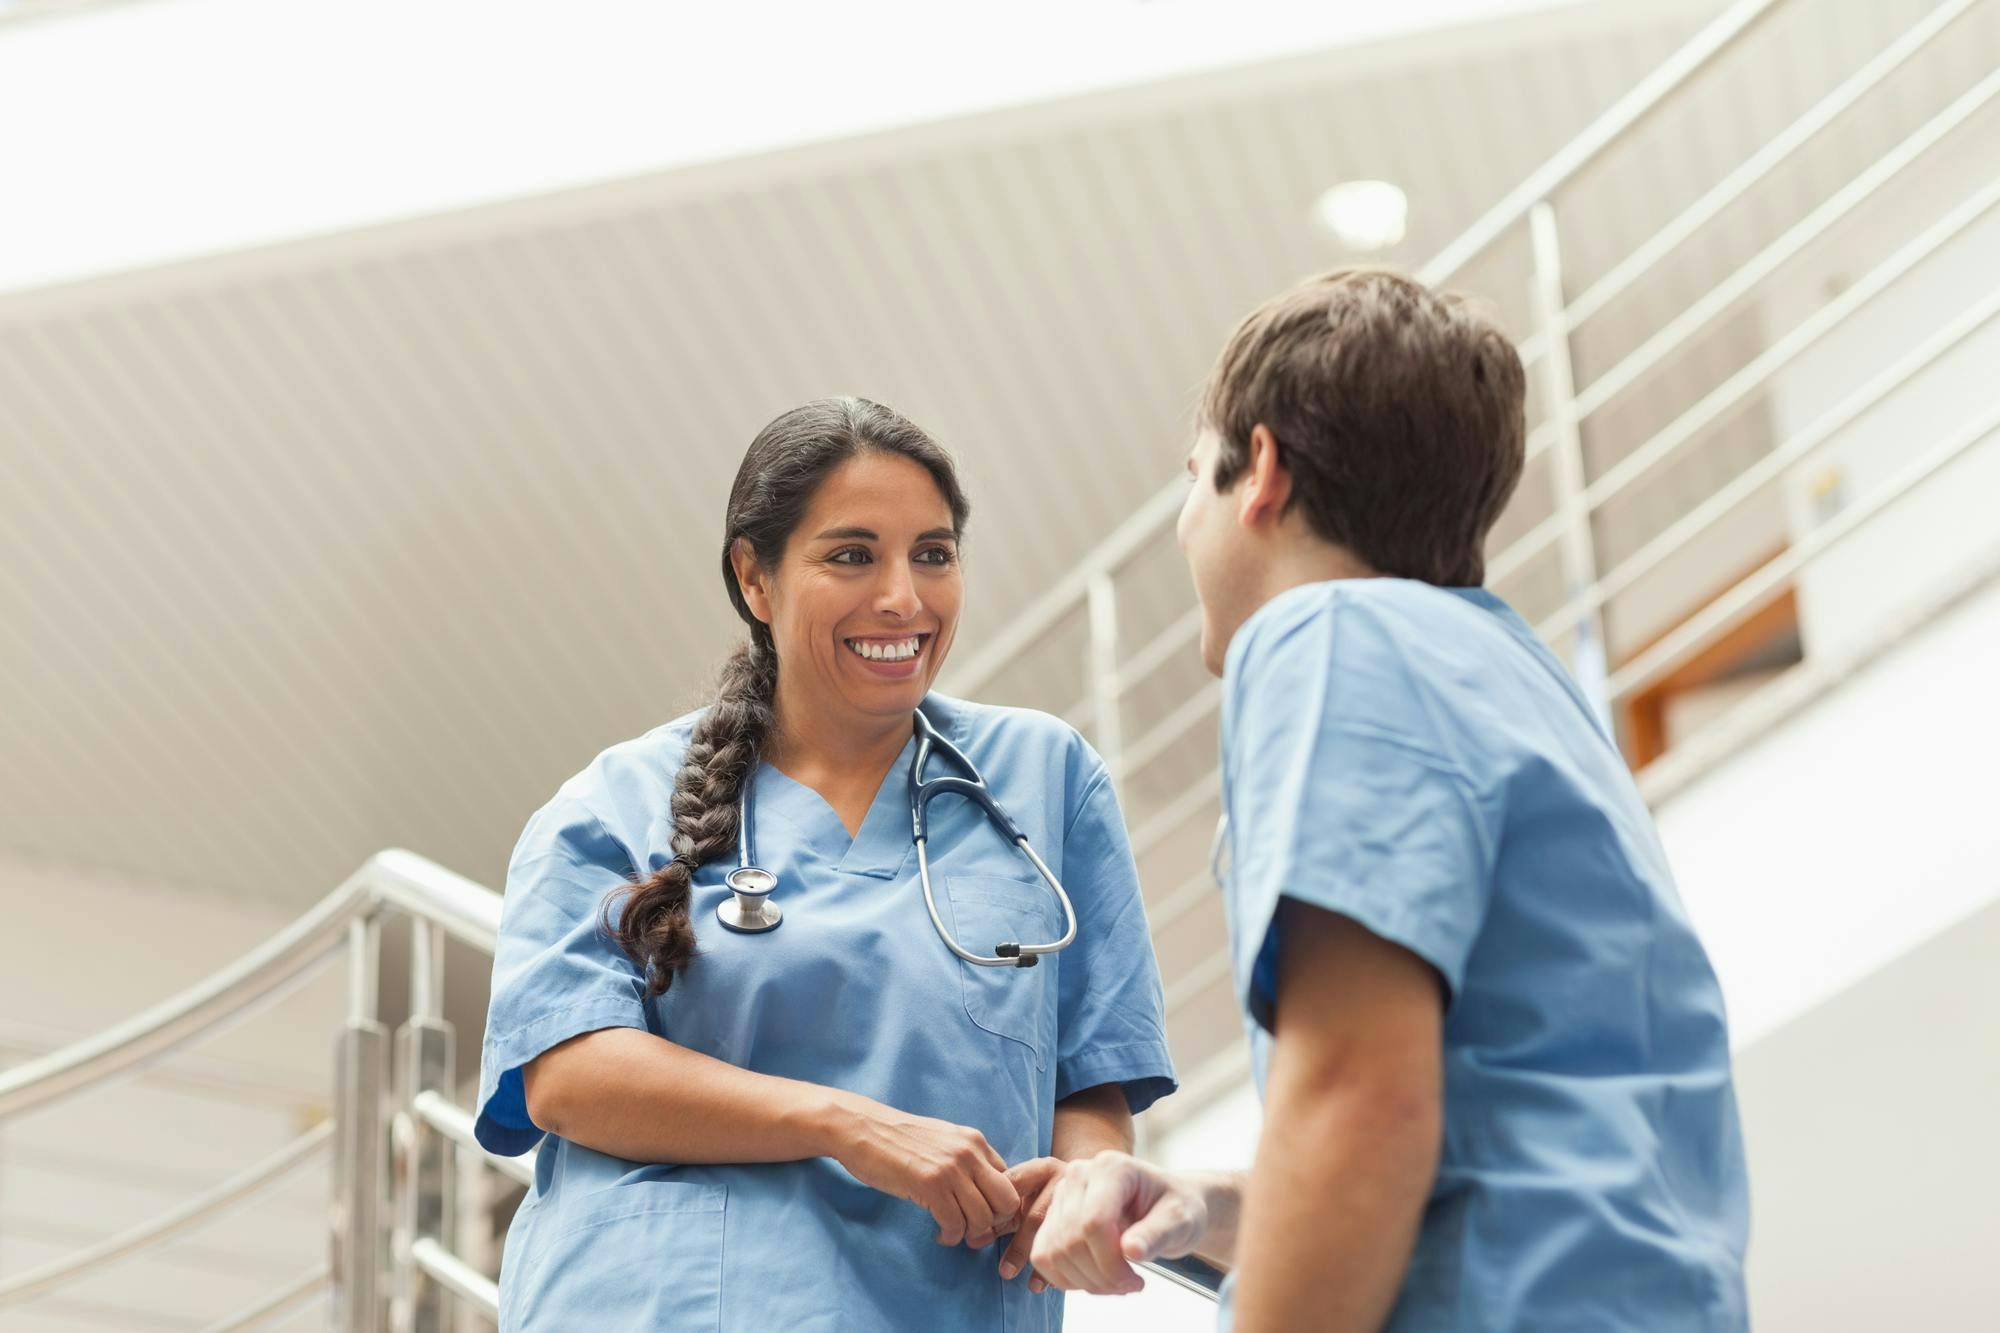 Two healthcare professionals in blue scrubs chatting amiably near a staircase in a medical facility; one has a stethoscope around her neck and both appear engaged in conversation.